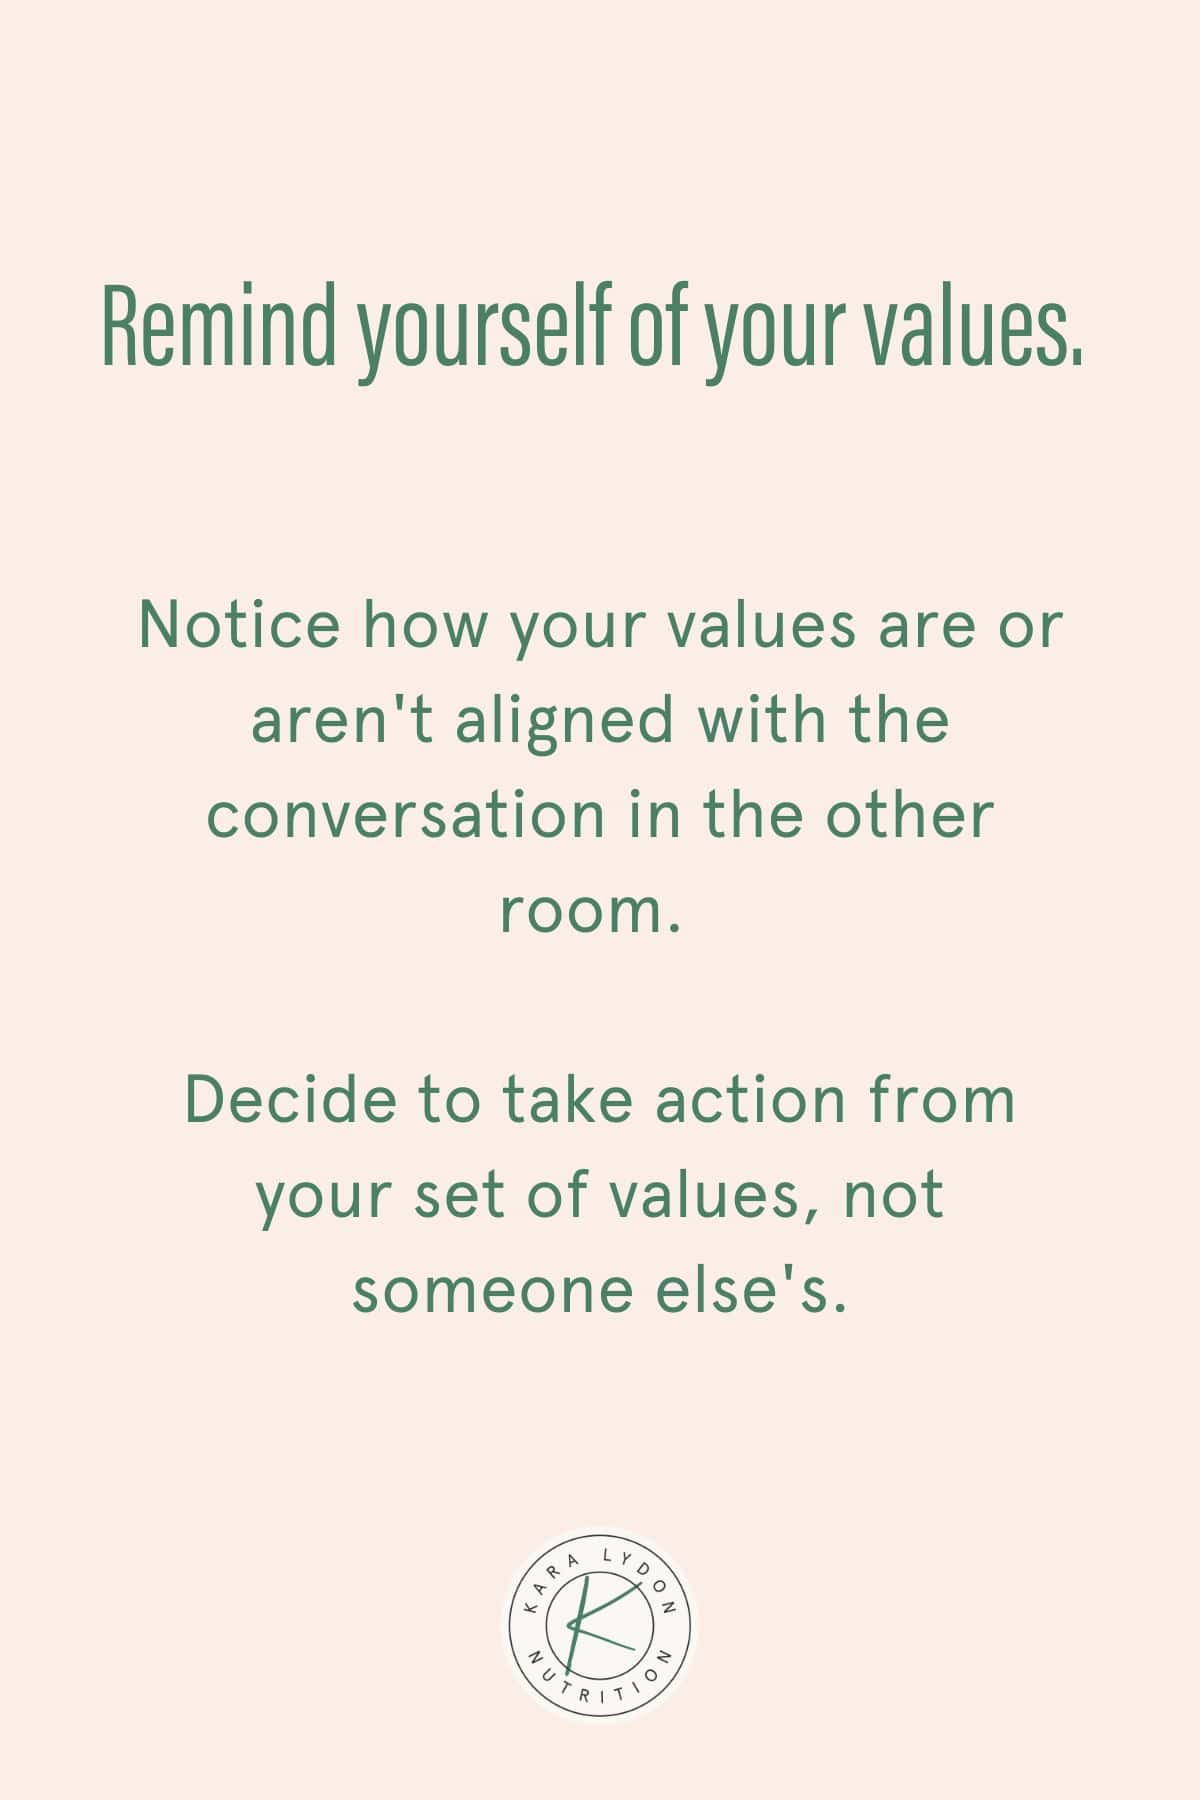 Graphic with quote: "Remember your values.  Notice how your values ​​are or are not aligned with the conversation in the other room.  Decide to act on your set of values, not someone else's."